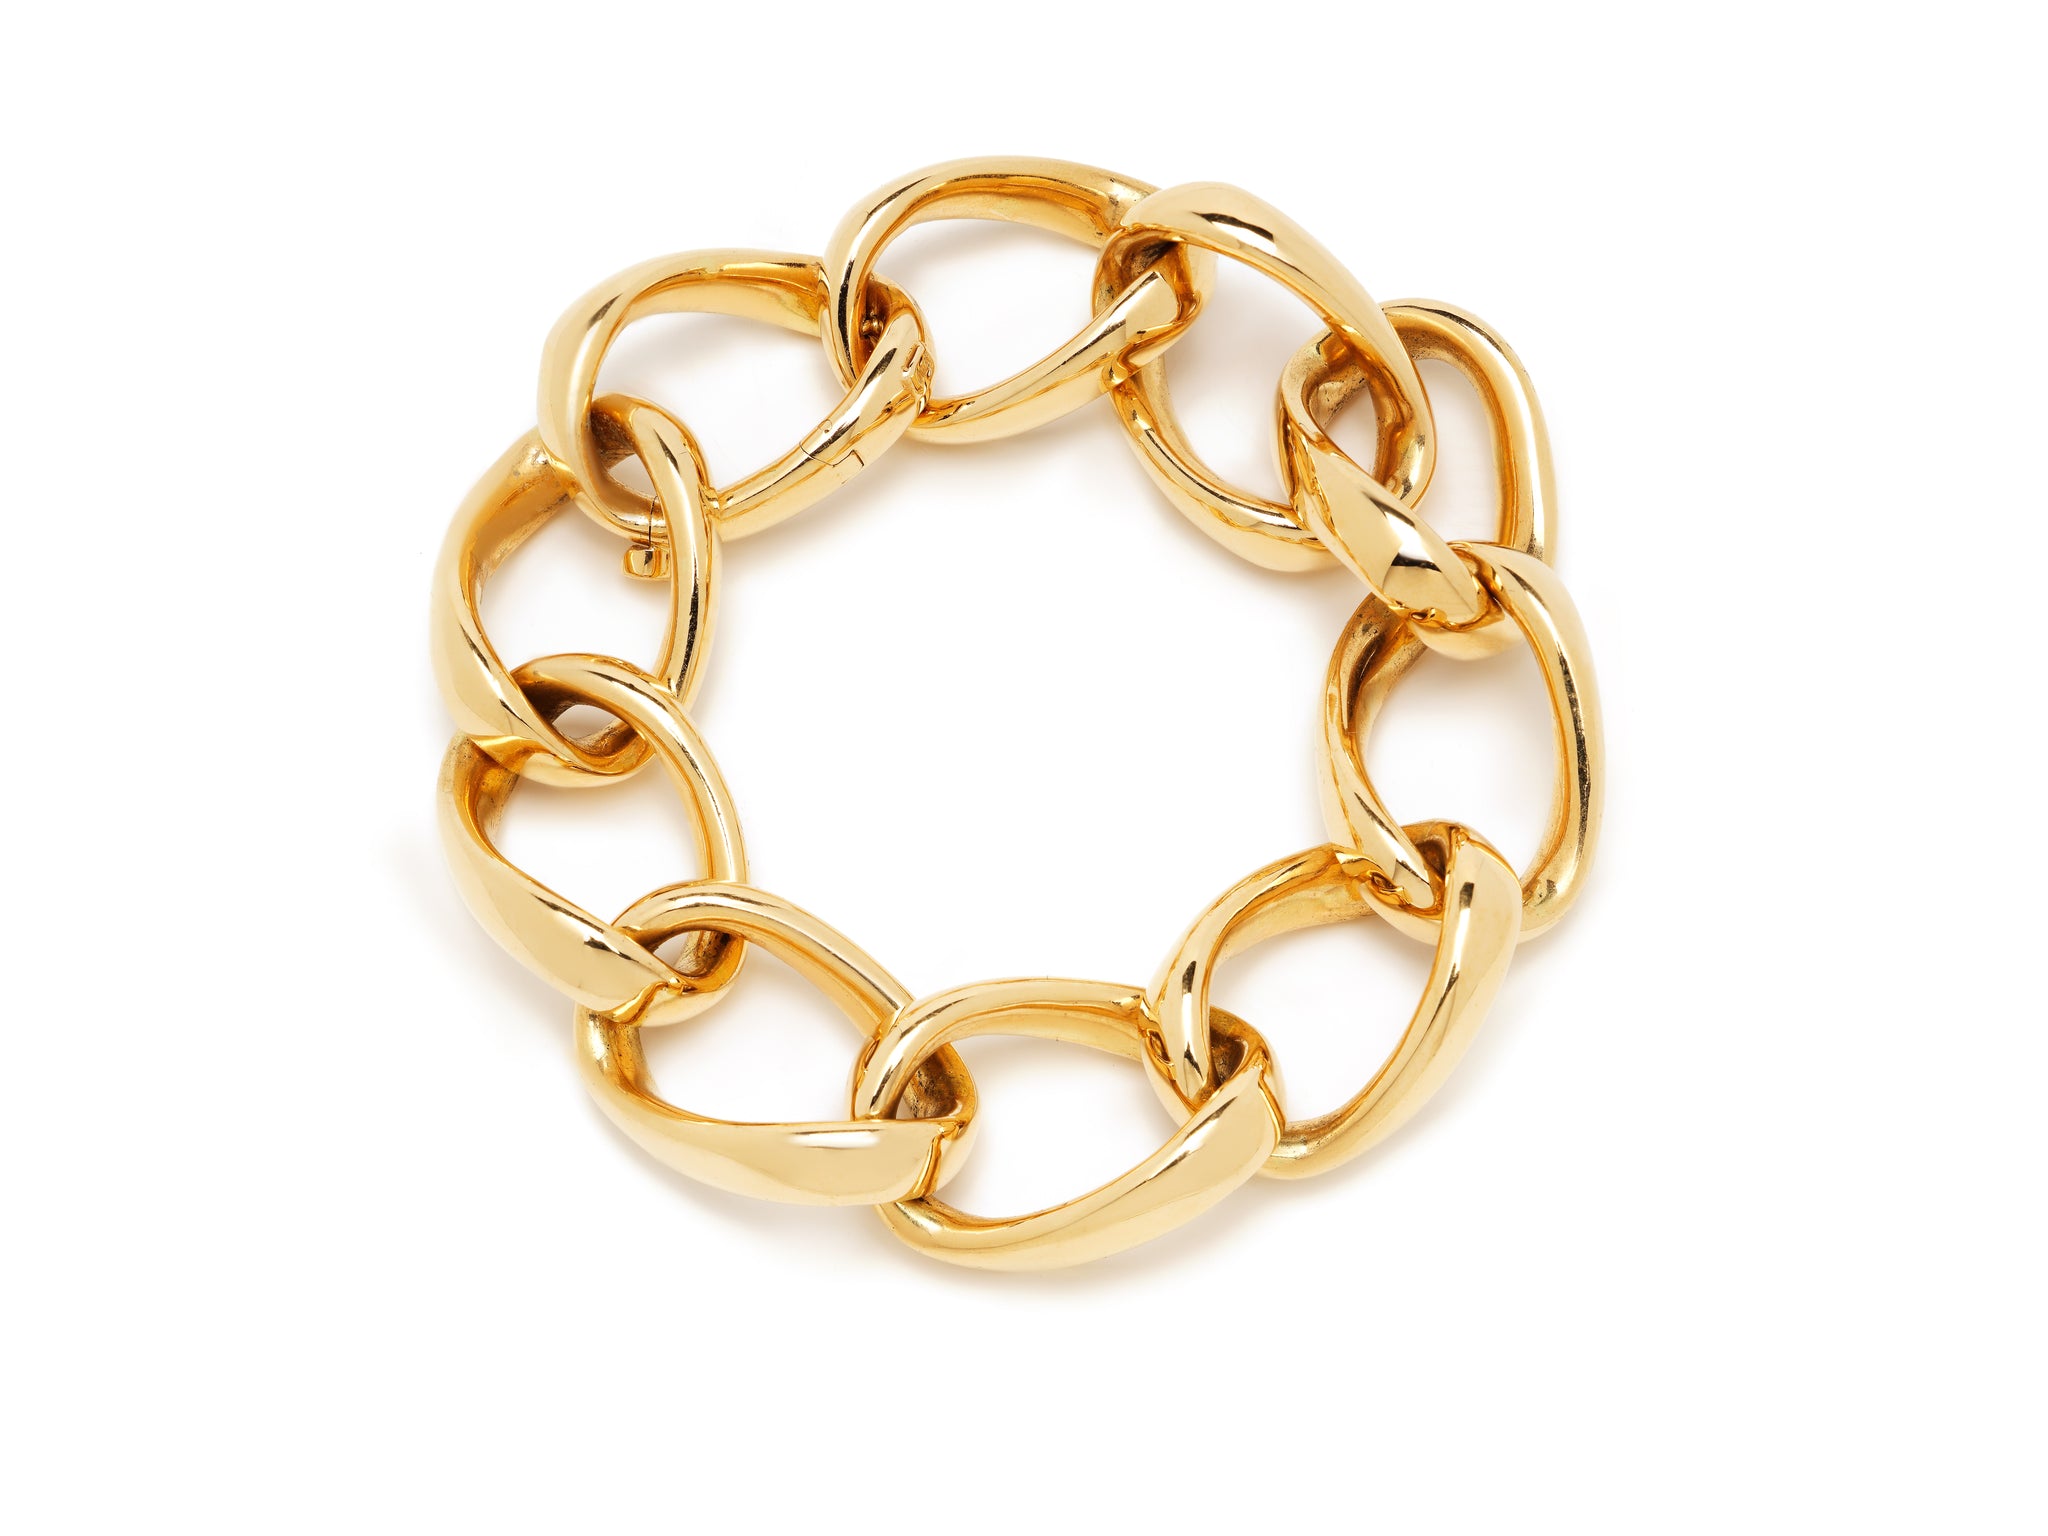 18 krt yellow gold bracelet with fantasy link